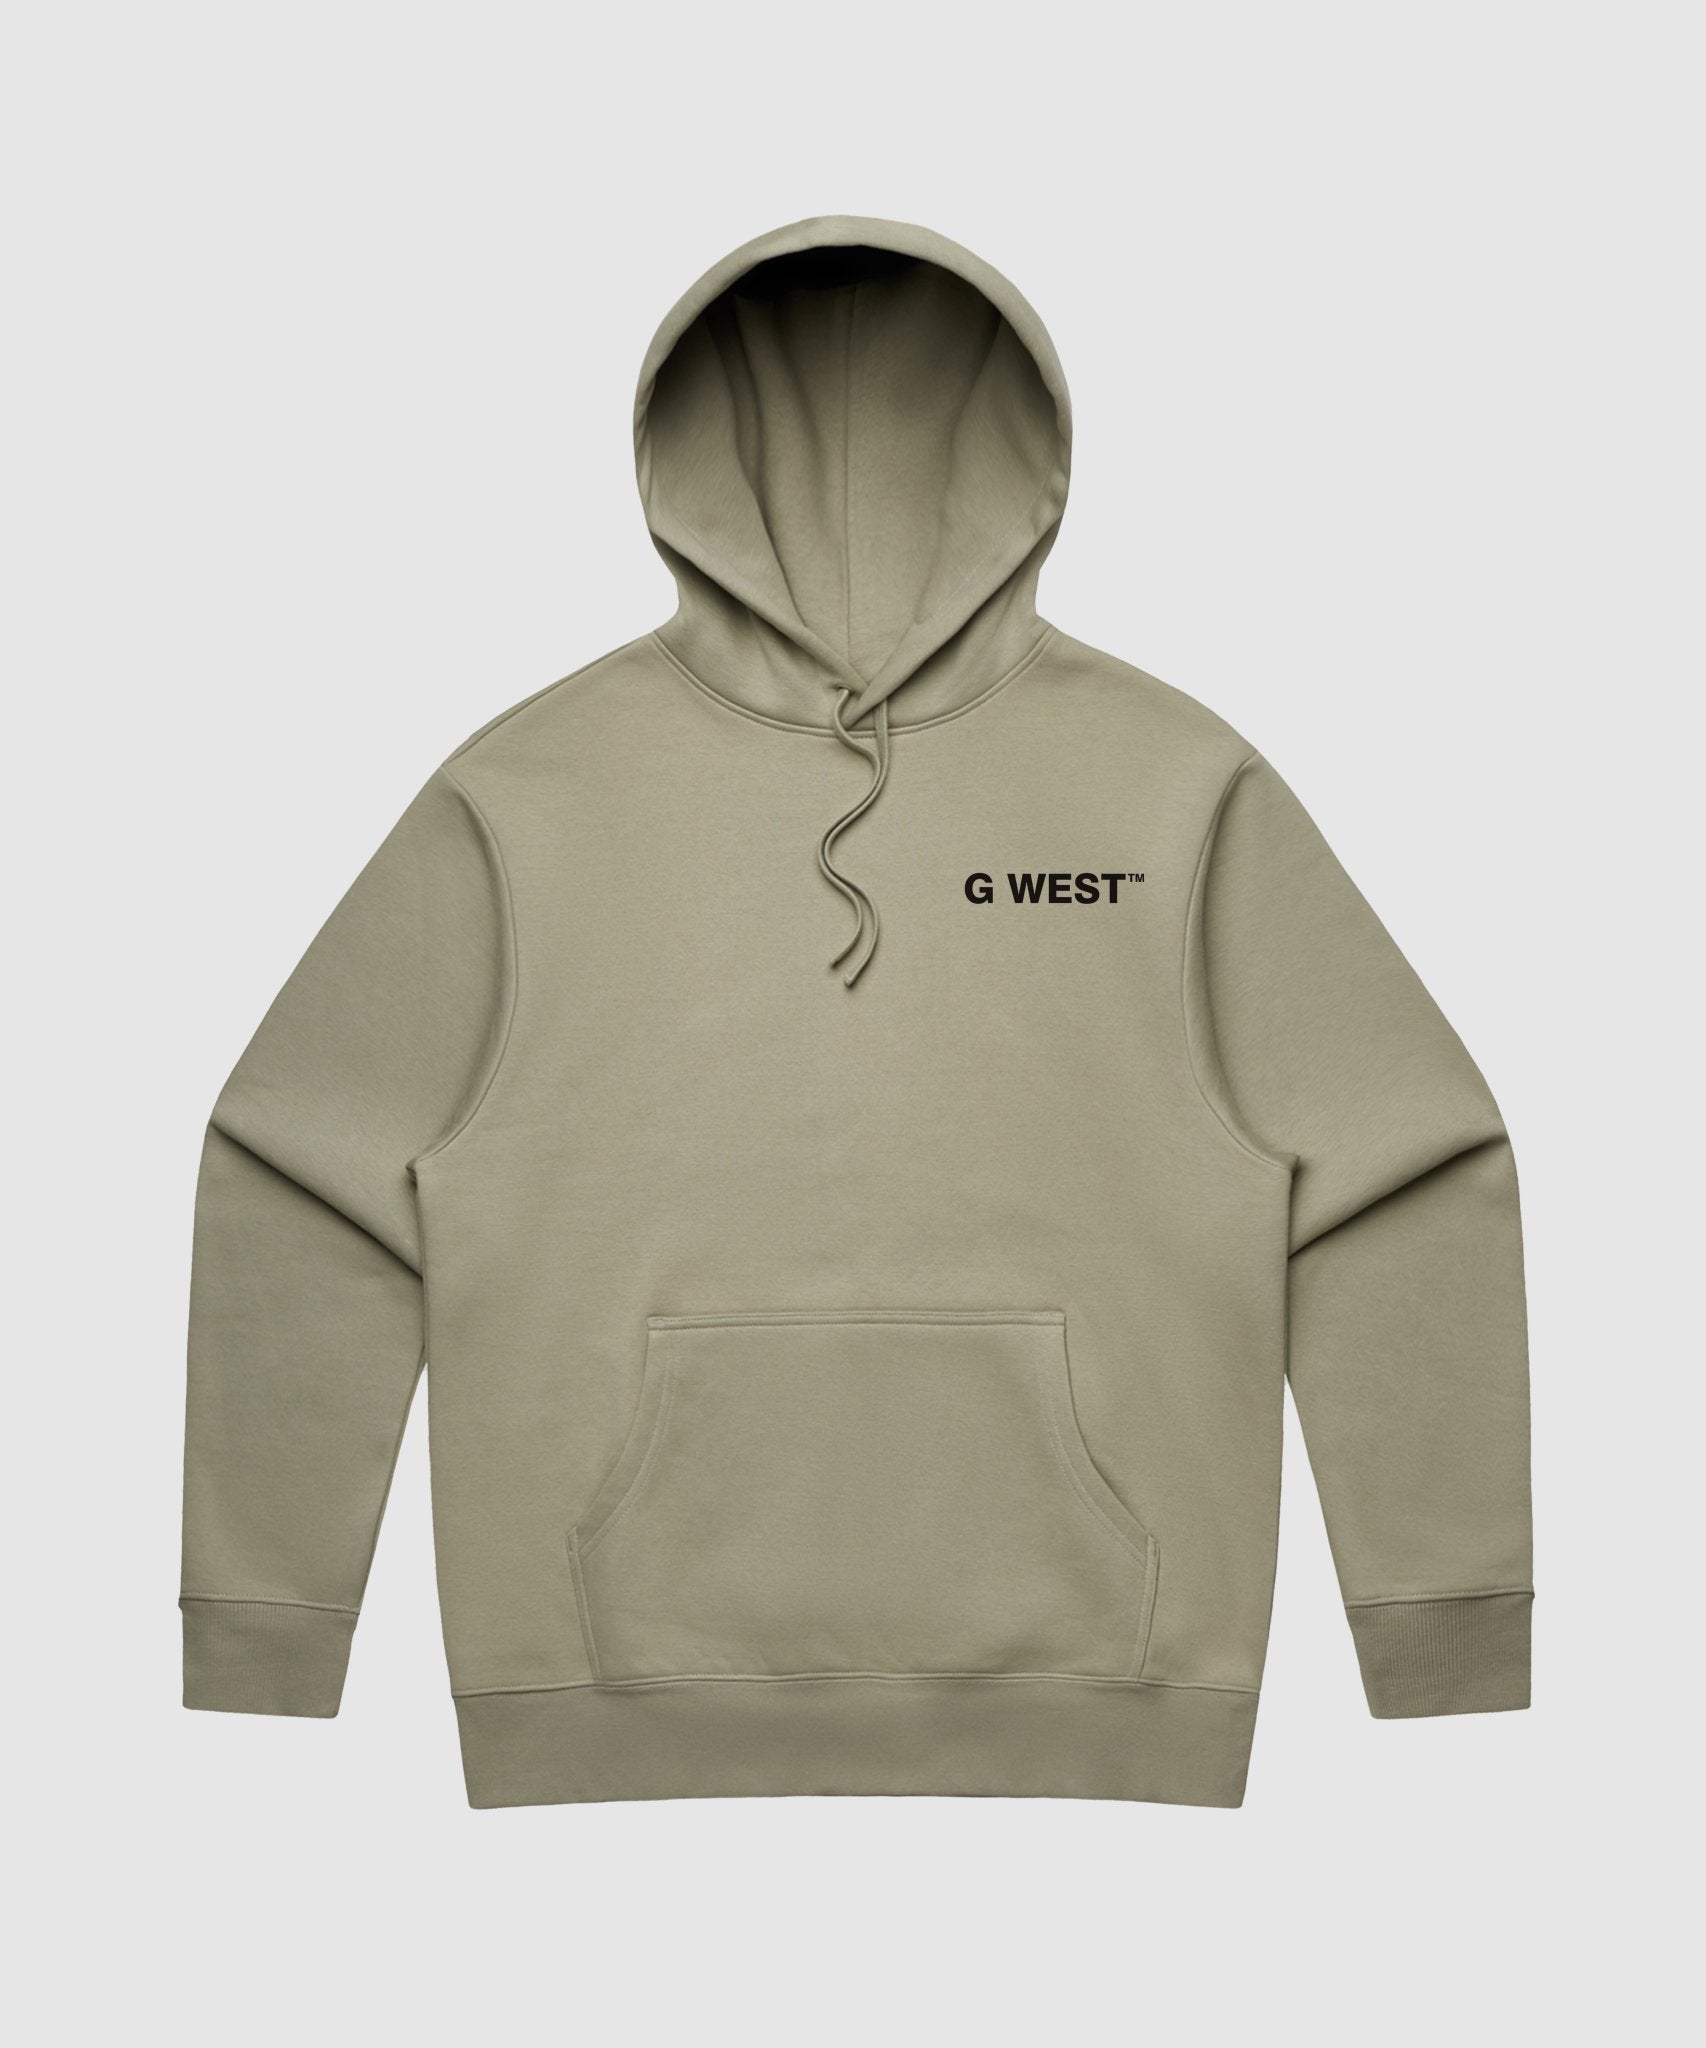 G WEST HOLOGRAPHIC CHAIN HEAVY PREMIUM HOODIE - 6 COLORS - G West